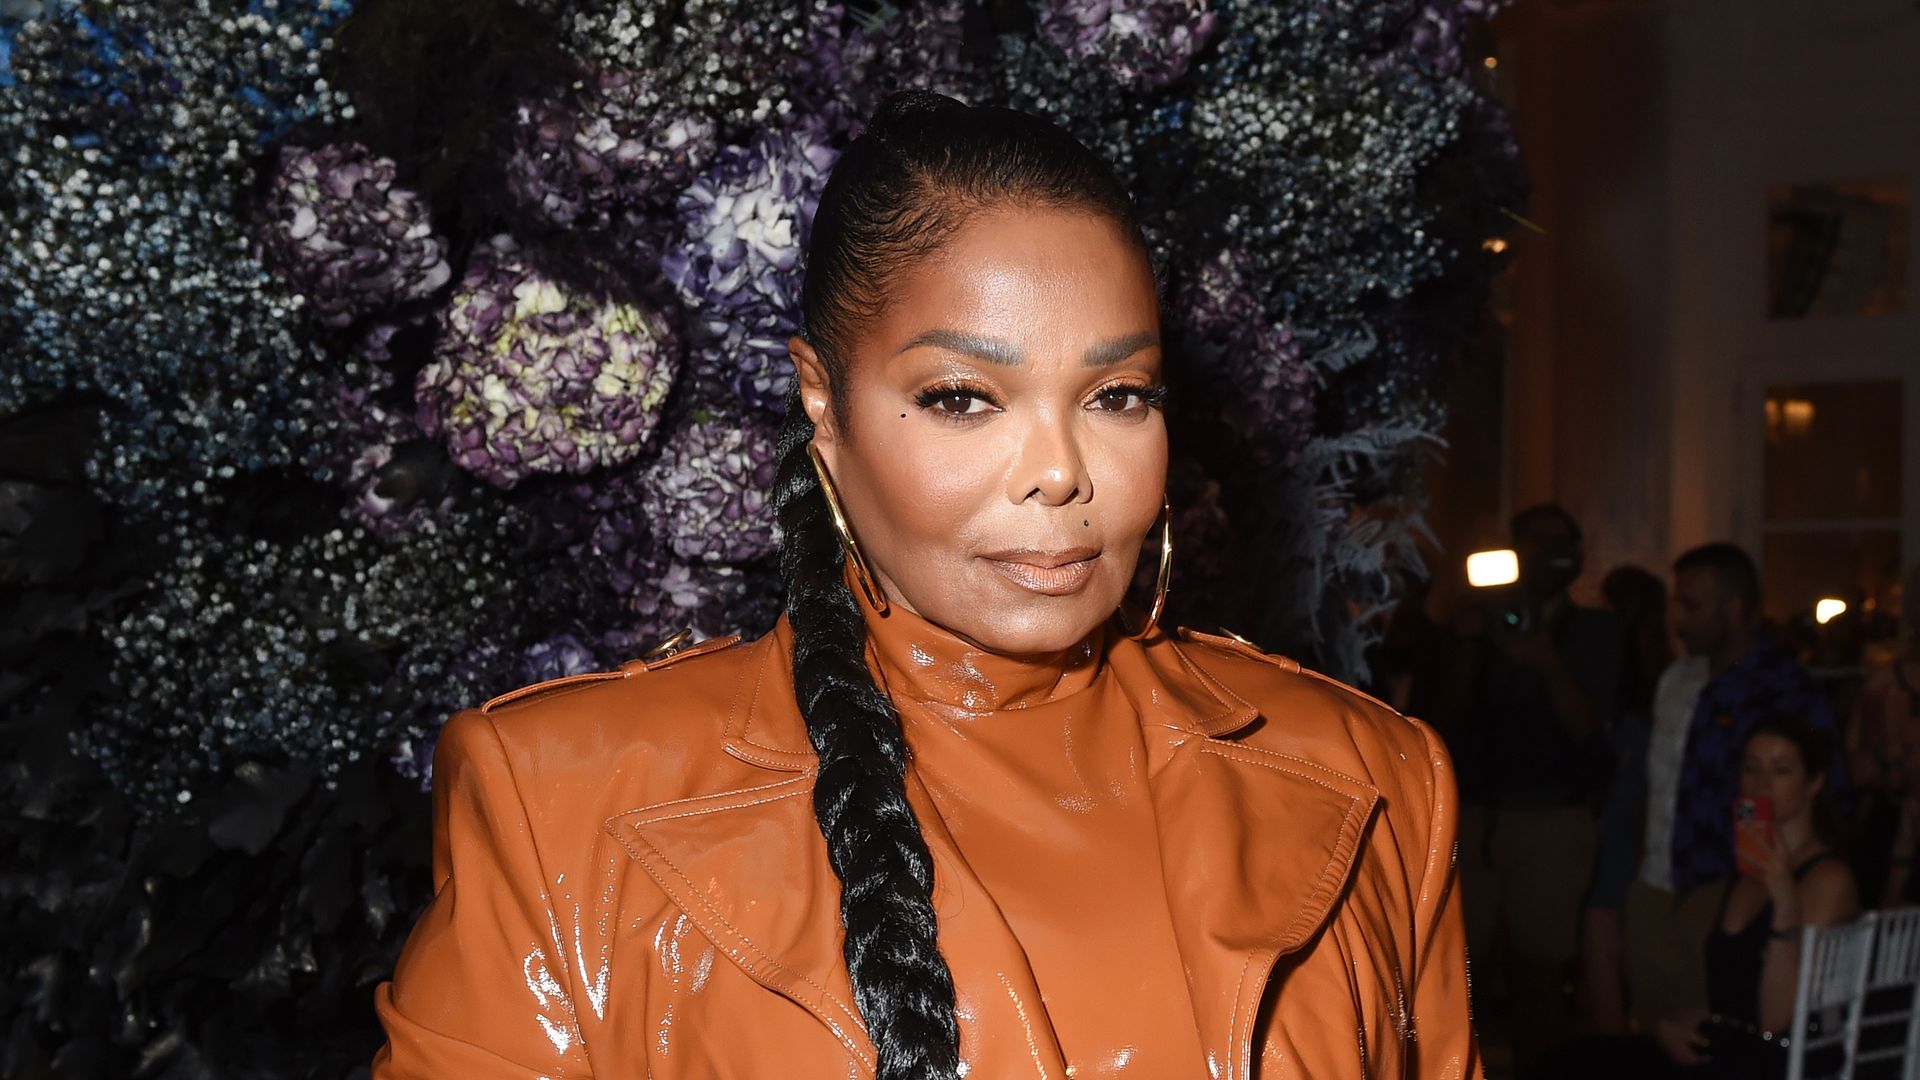 Janet Jackson commands attention in preppy new look for rare public outing – see photos